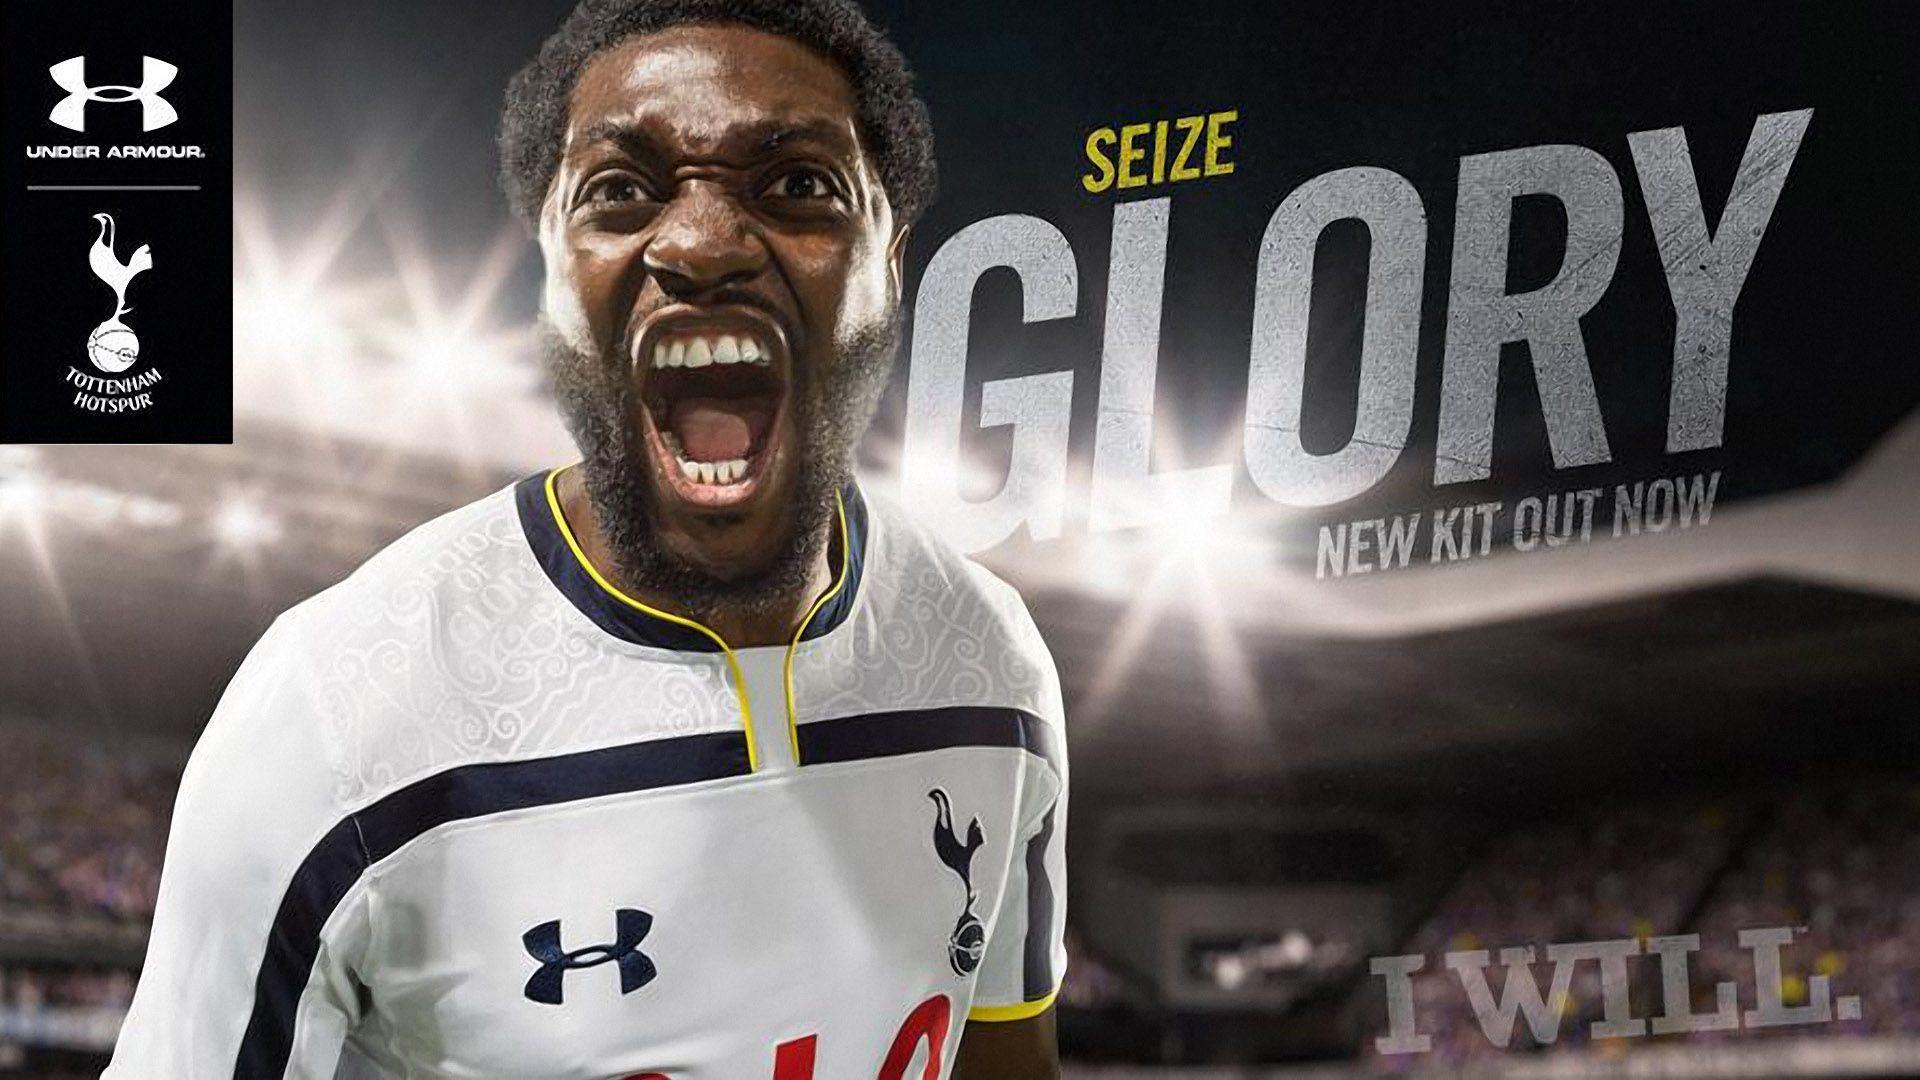 Tottenham Hotspur Under Armour 2014 15 Home Kit Wallpaper Wide Or